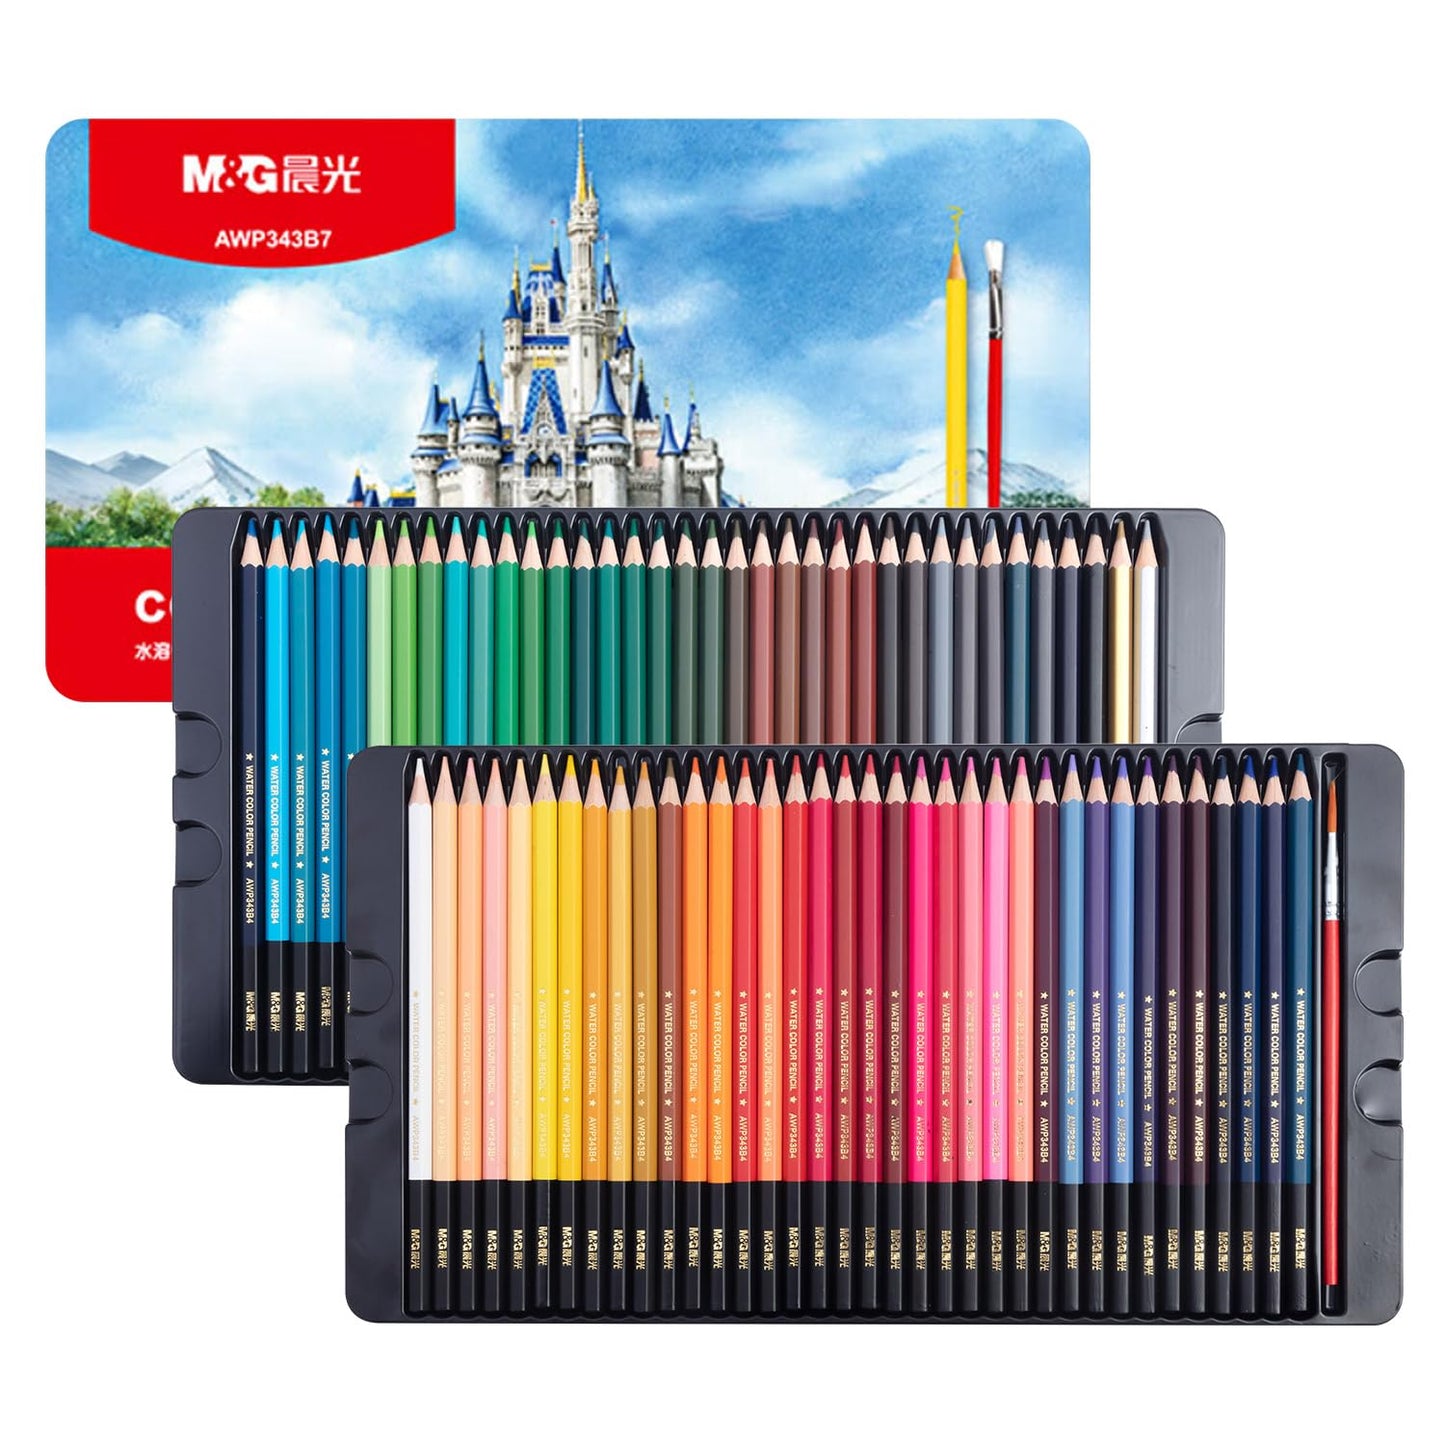 M&G 72 Colored Pencils for Adults Coloring, Professional Vibrant Artists Pencil Drawing Drawing Supplies Sketching Pencils Coloring Kits, Kids Art